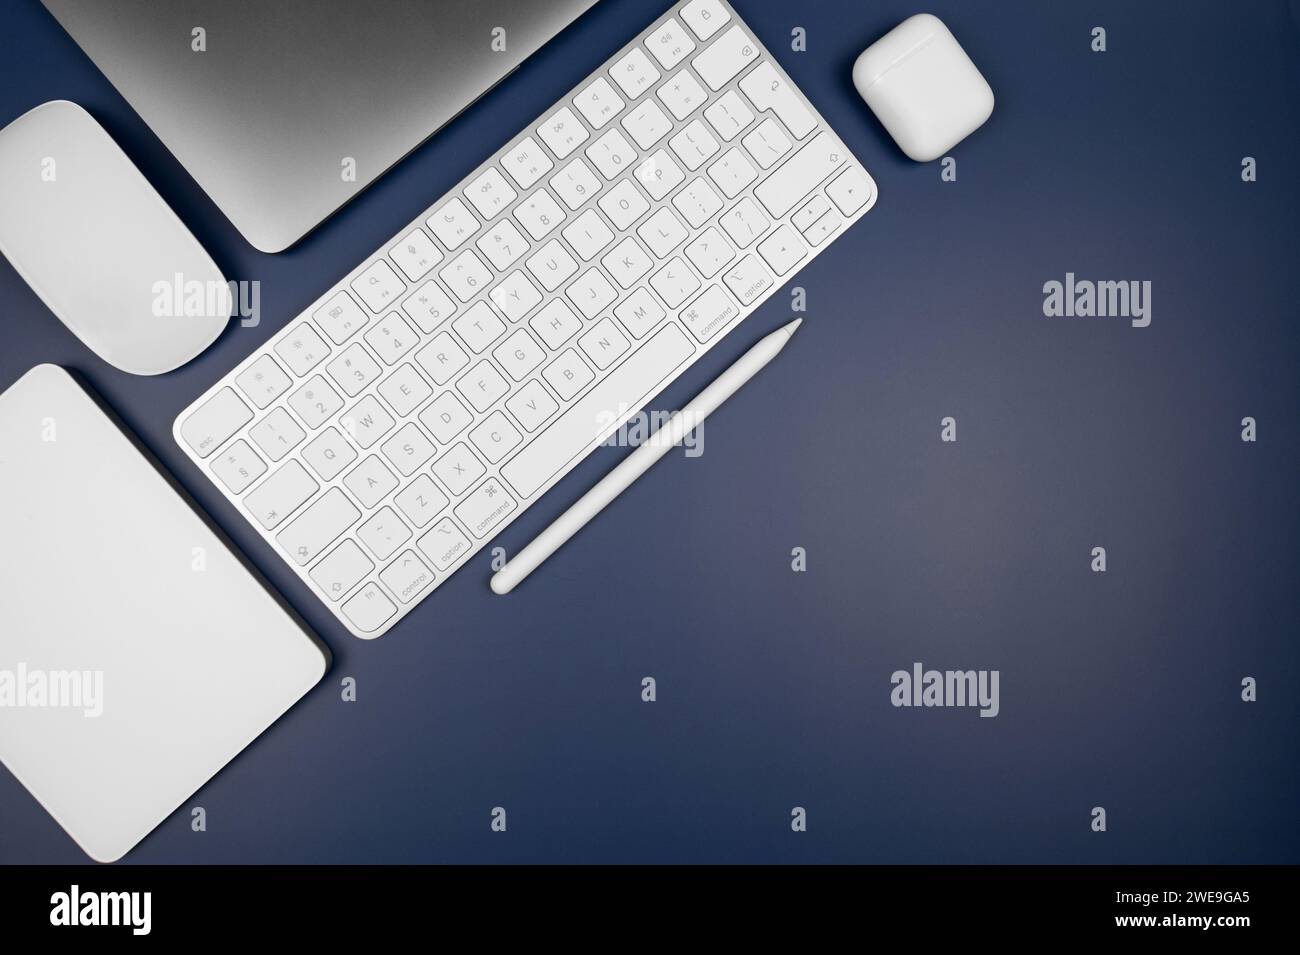 Top view of laptop computer, white keyboard, touchpad, mouse, earphones case and pen on dark blue background. Modern office flat lay, copy space. Stock Photo